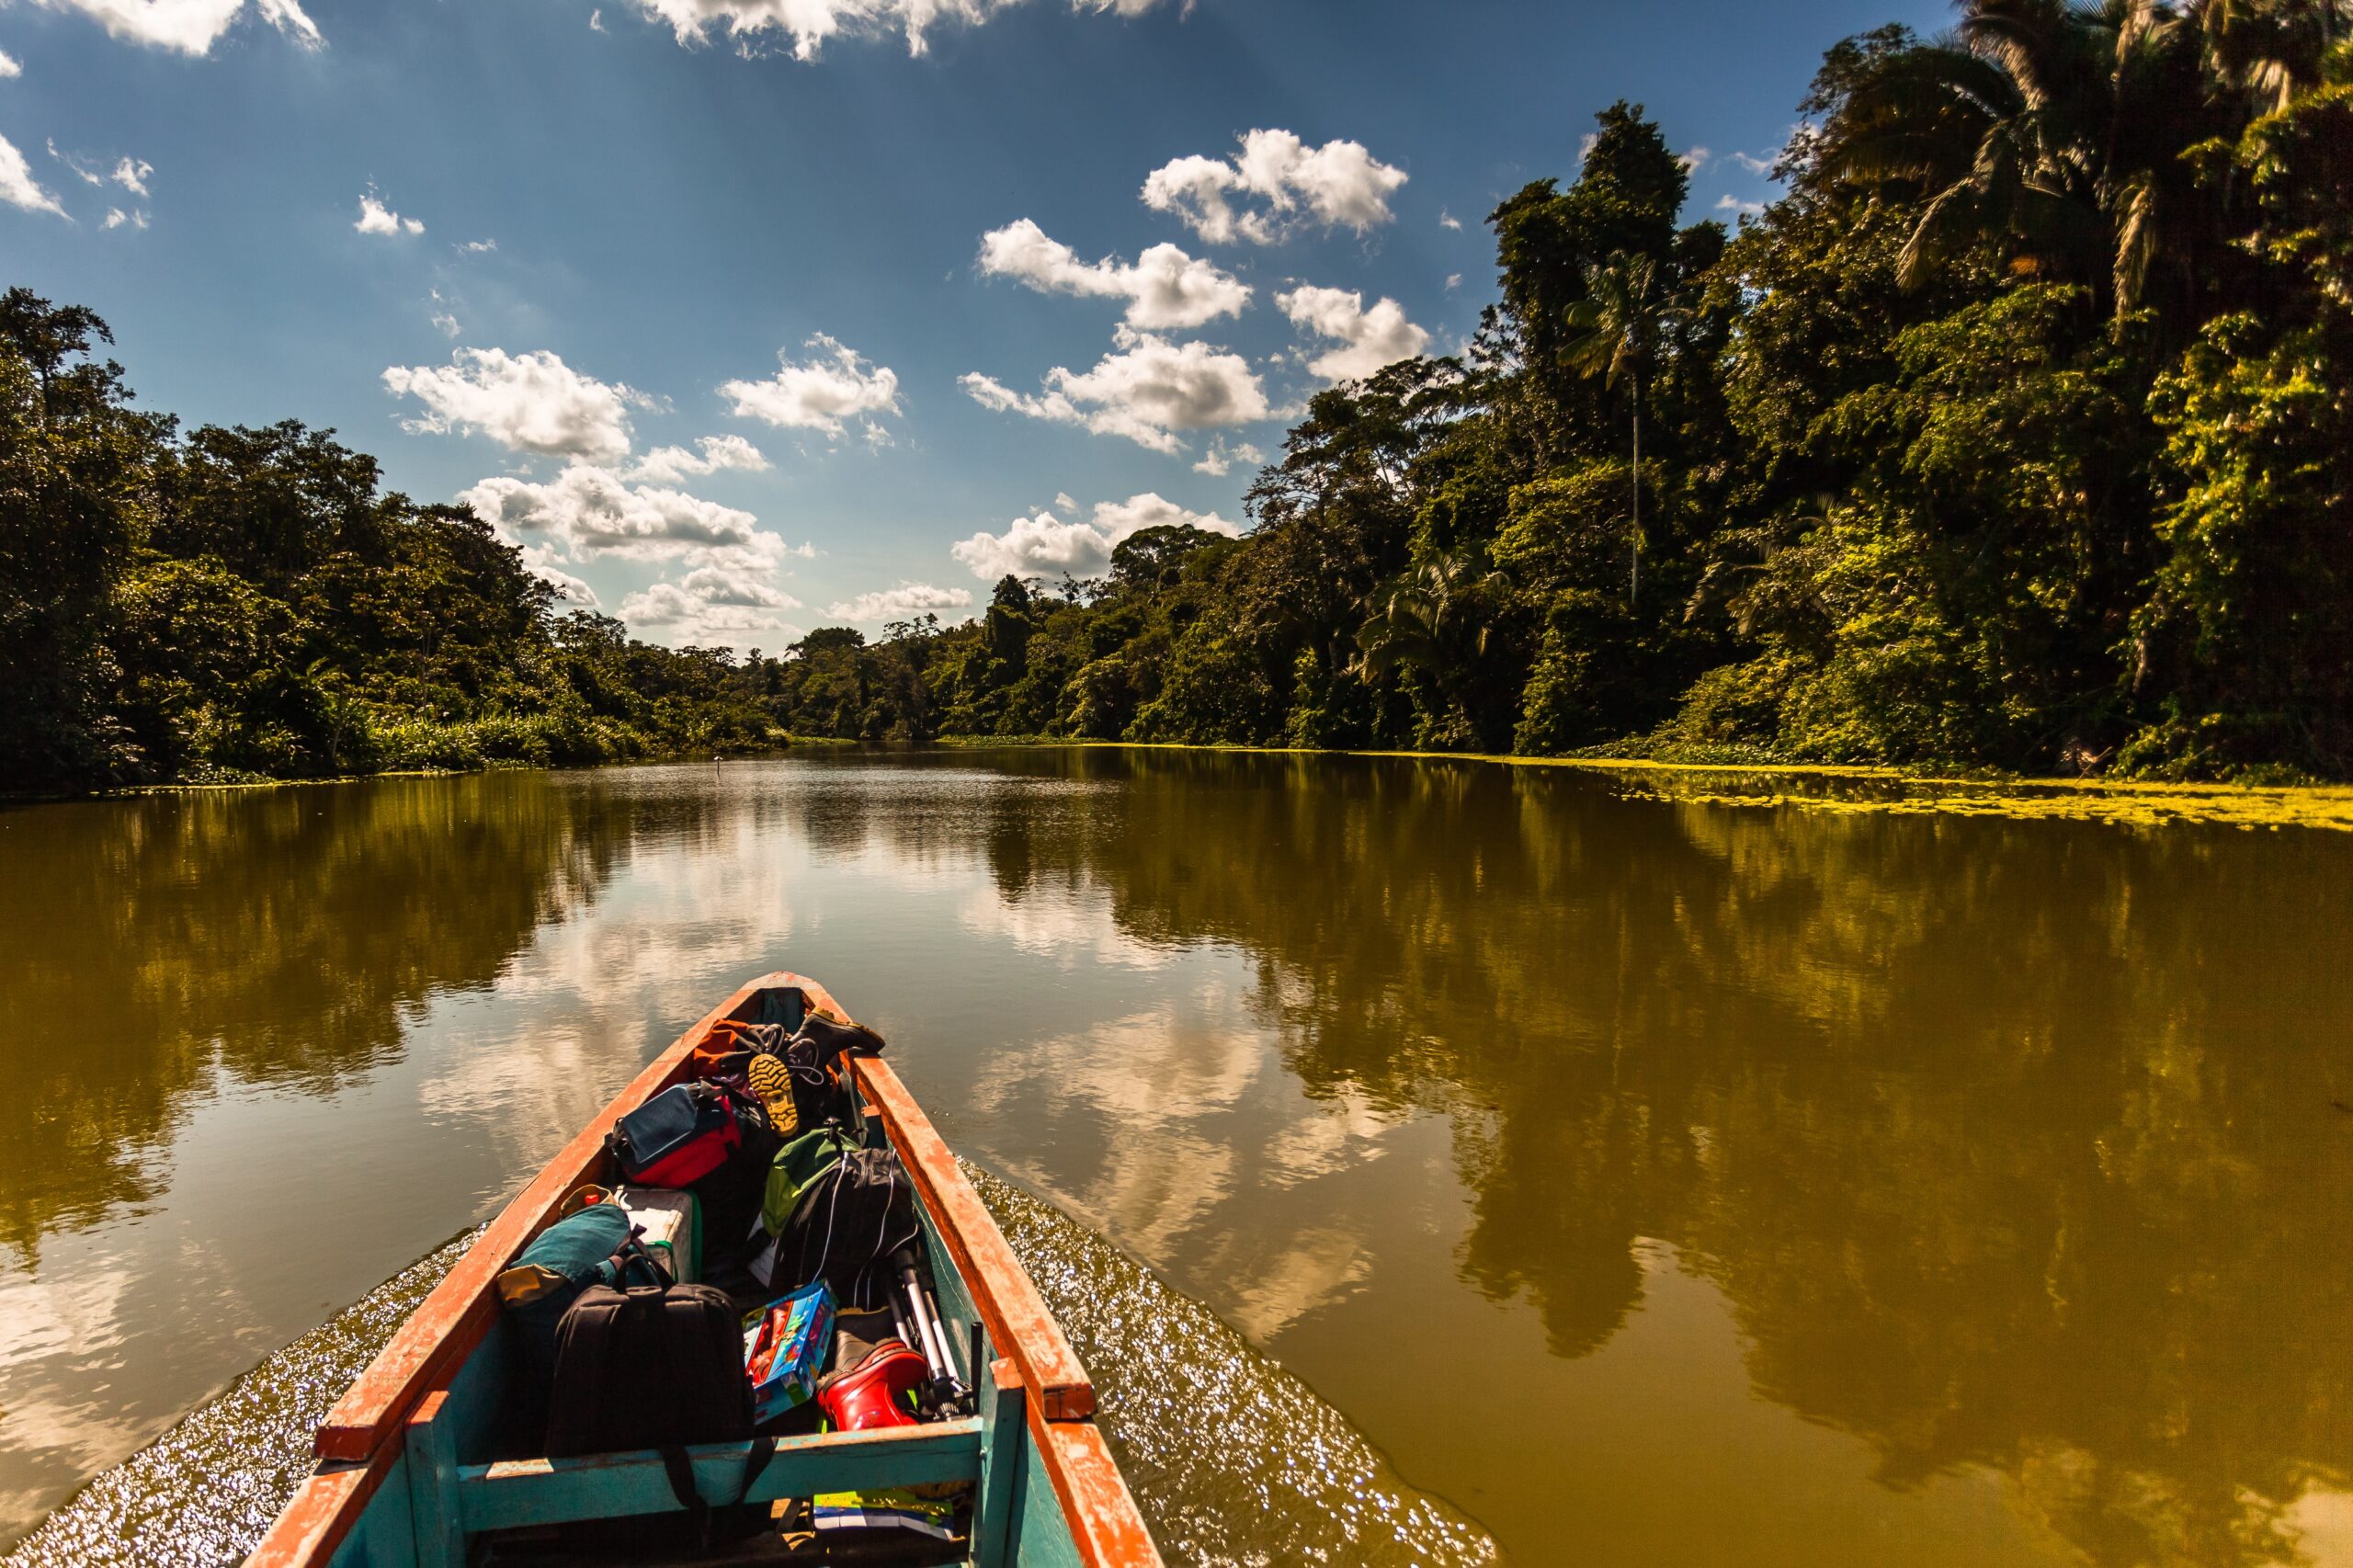 By boat through the Marasha nature reserve on the Amazon River